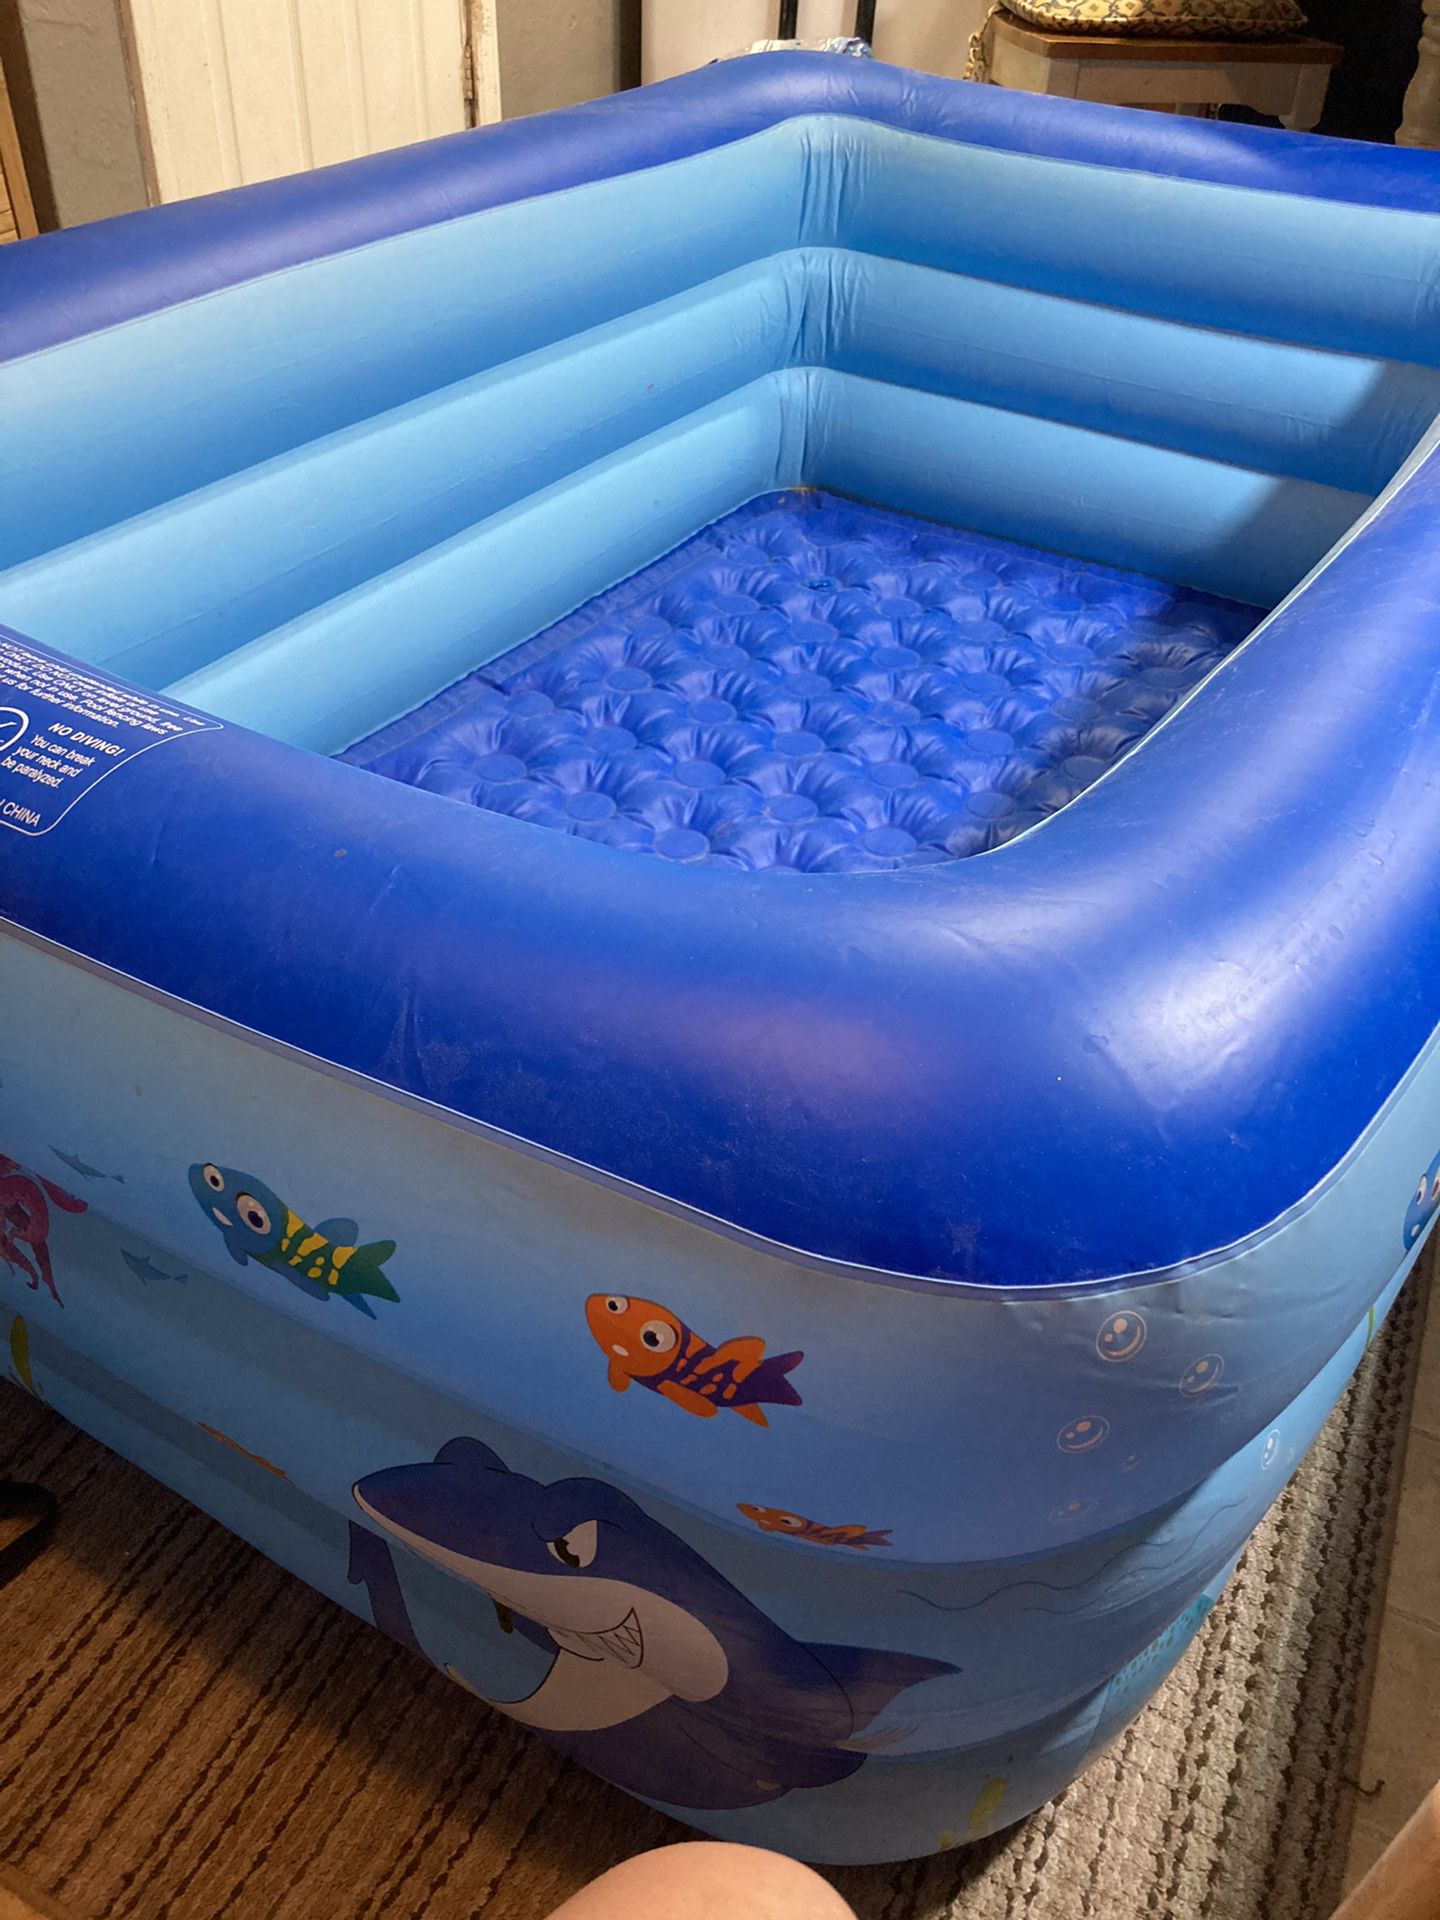 NEMO HOME INFLATEABLE POOL